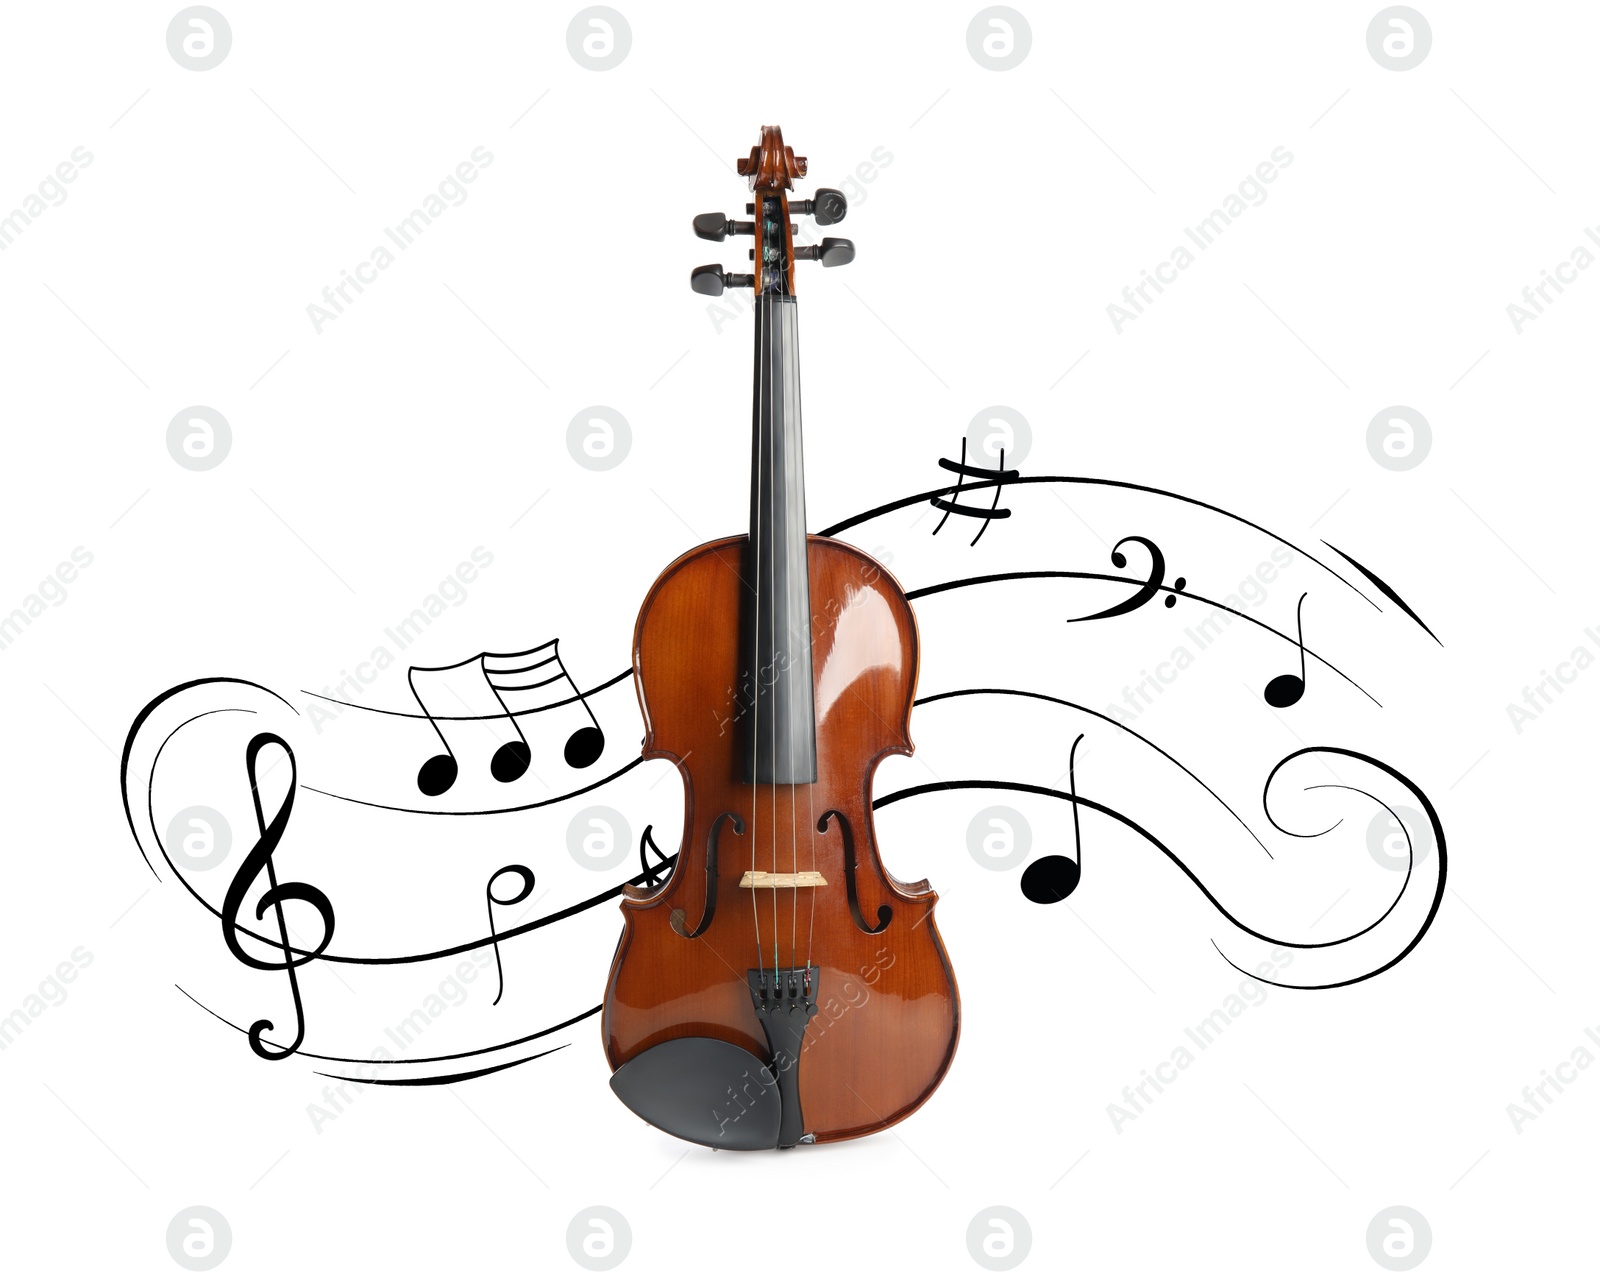 Image of Classic violin and music notes on white background